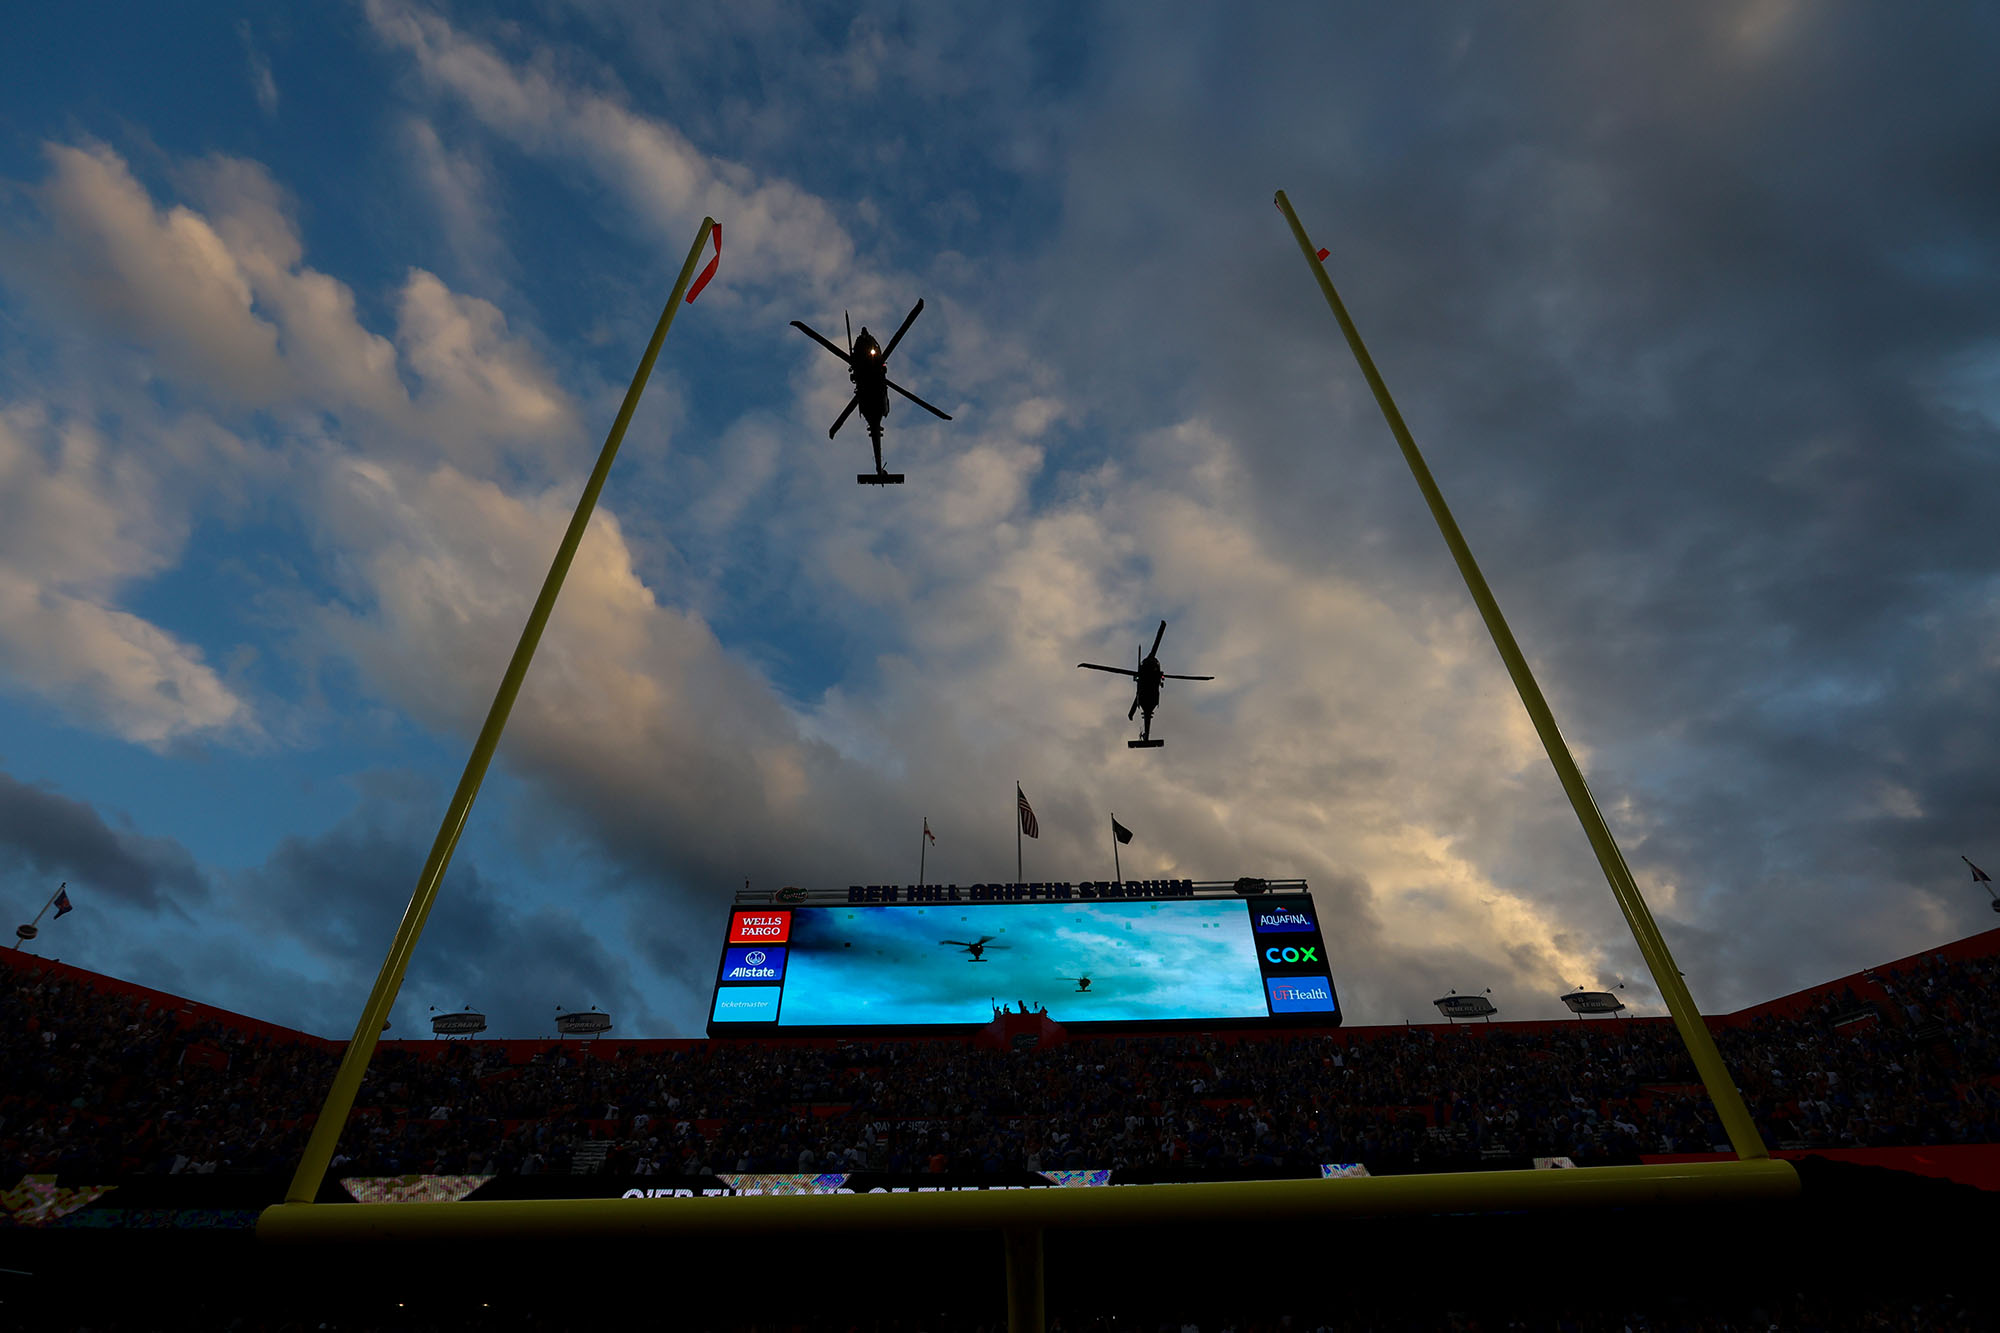 Military helicopters fly over Ben Hill Griffin Stadium during the National Anthem before an NCAA college football game between the Florida Gators and Tennessee Volunteers Saturday, Sept. 25, 2021, in Gainesville, Fla. (Matthew Stamey via AP)